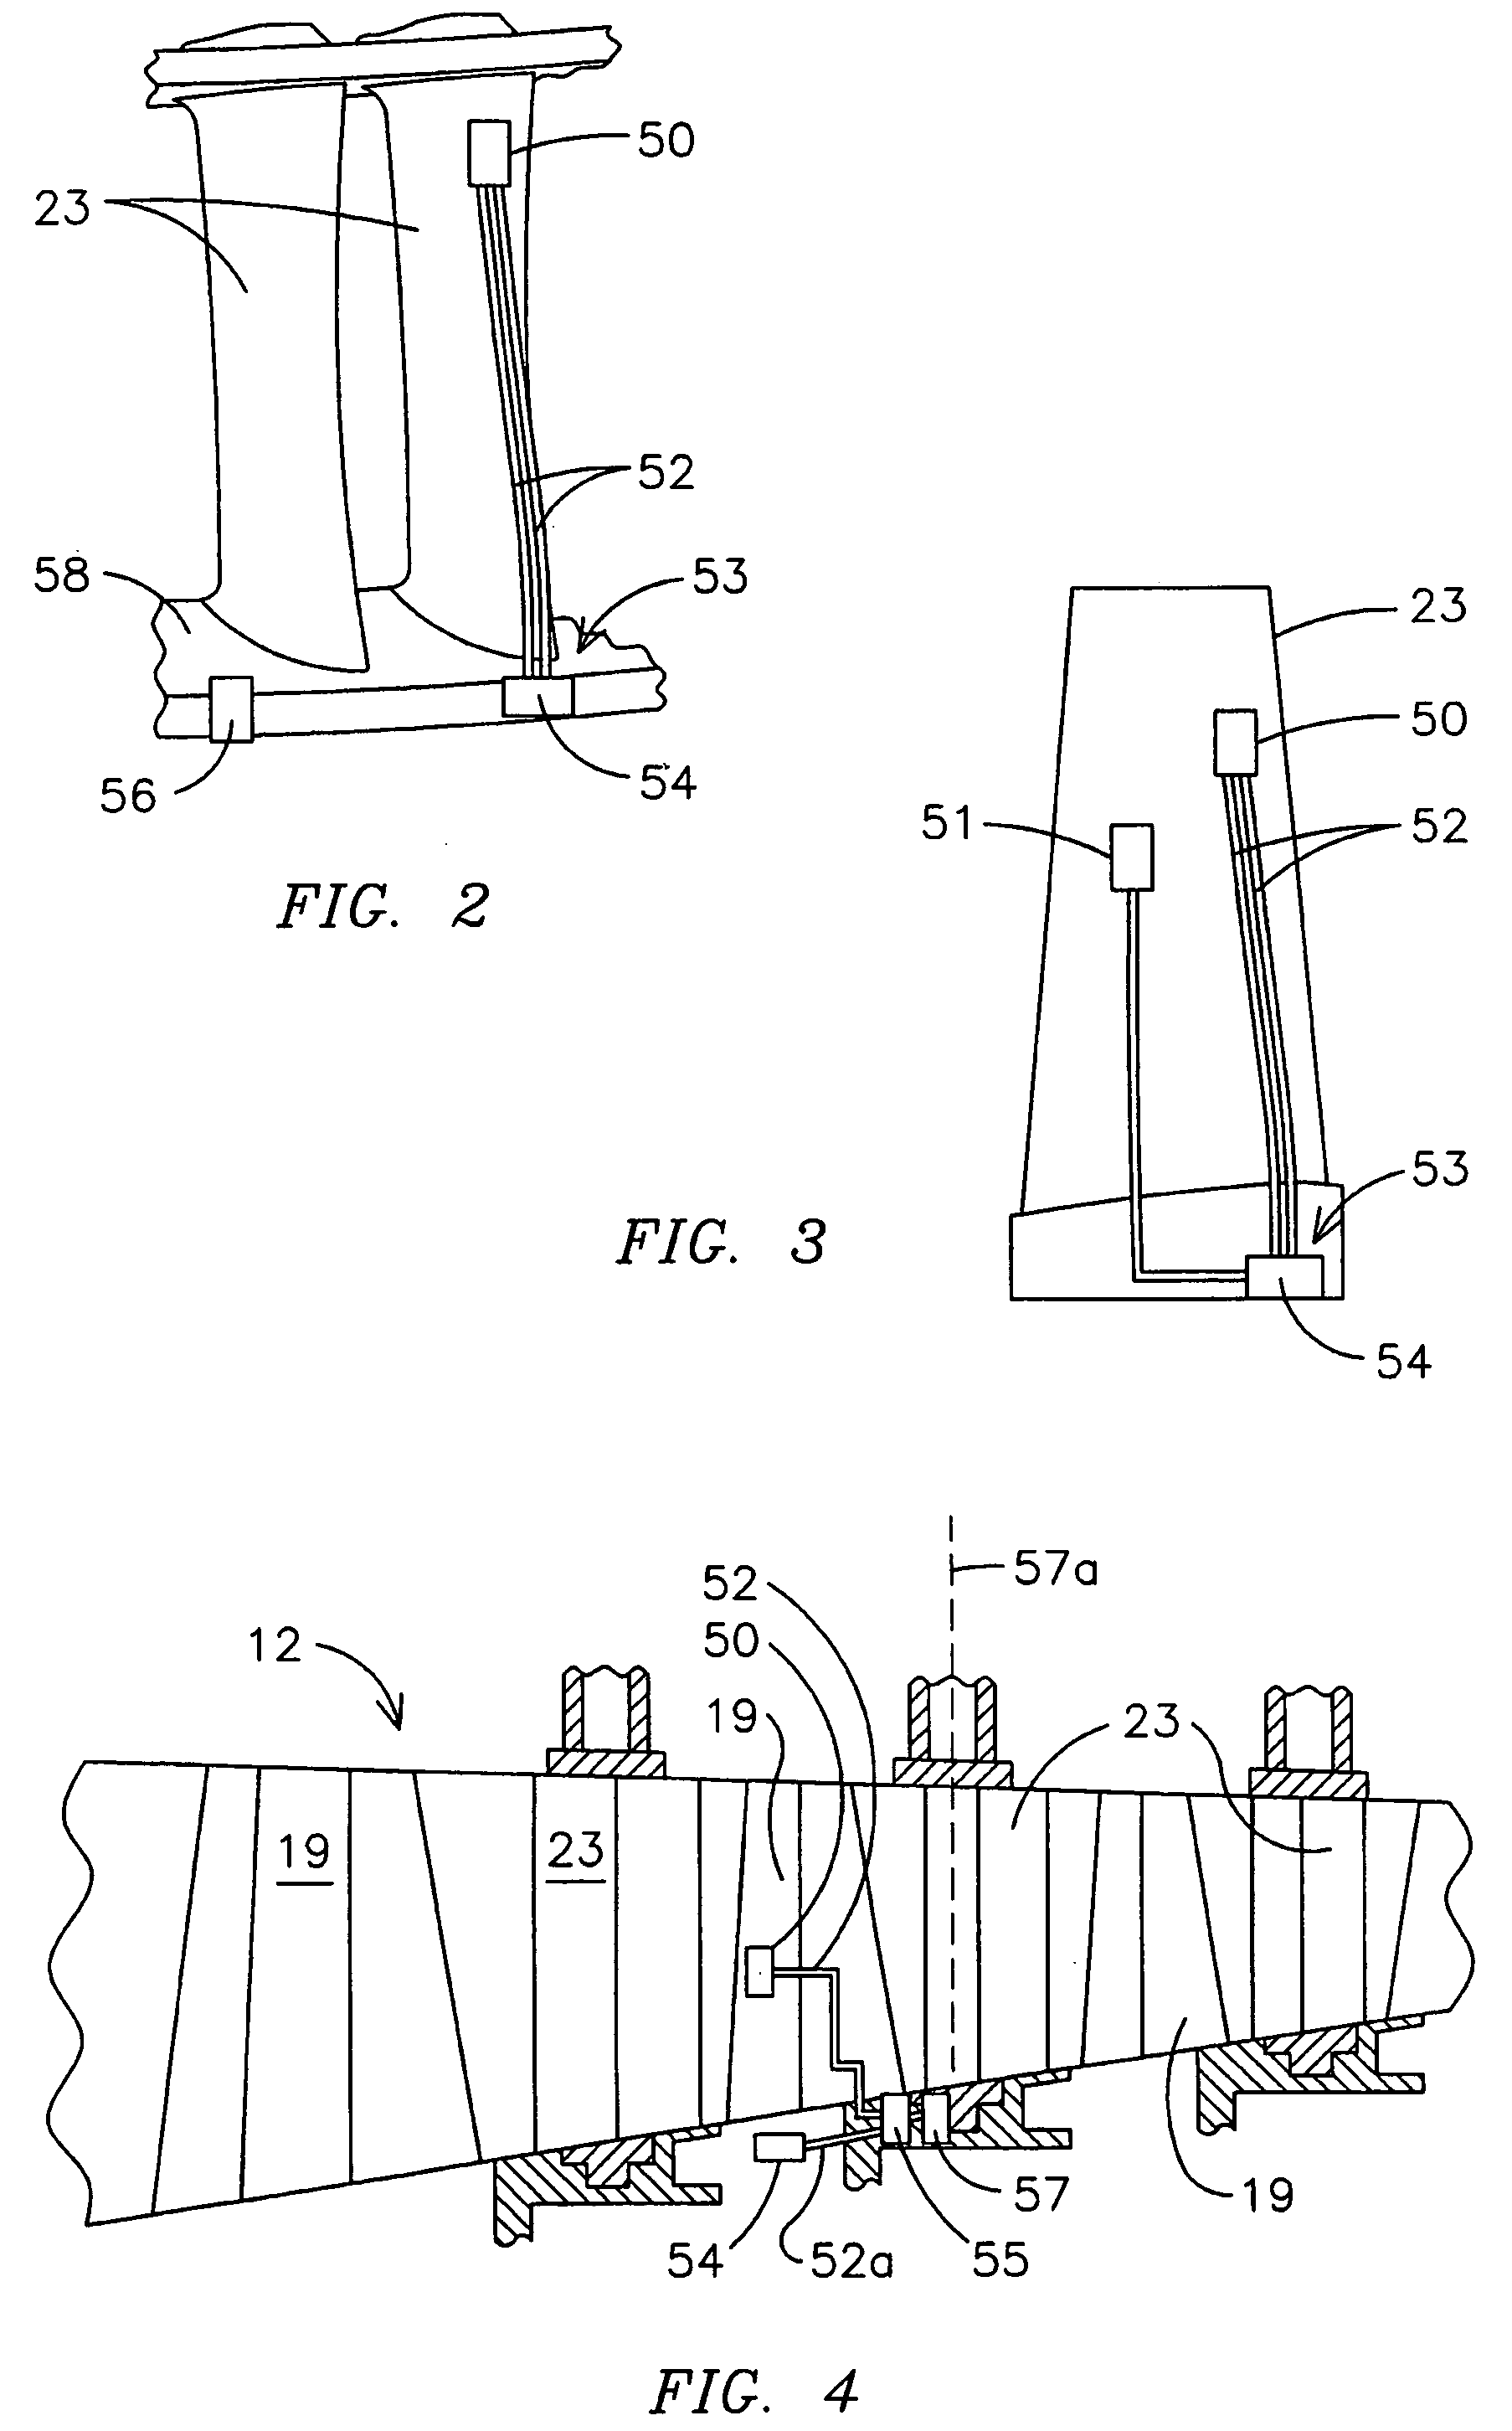 Apparatus and method of detecting wear in an abradable coating system